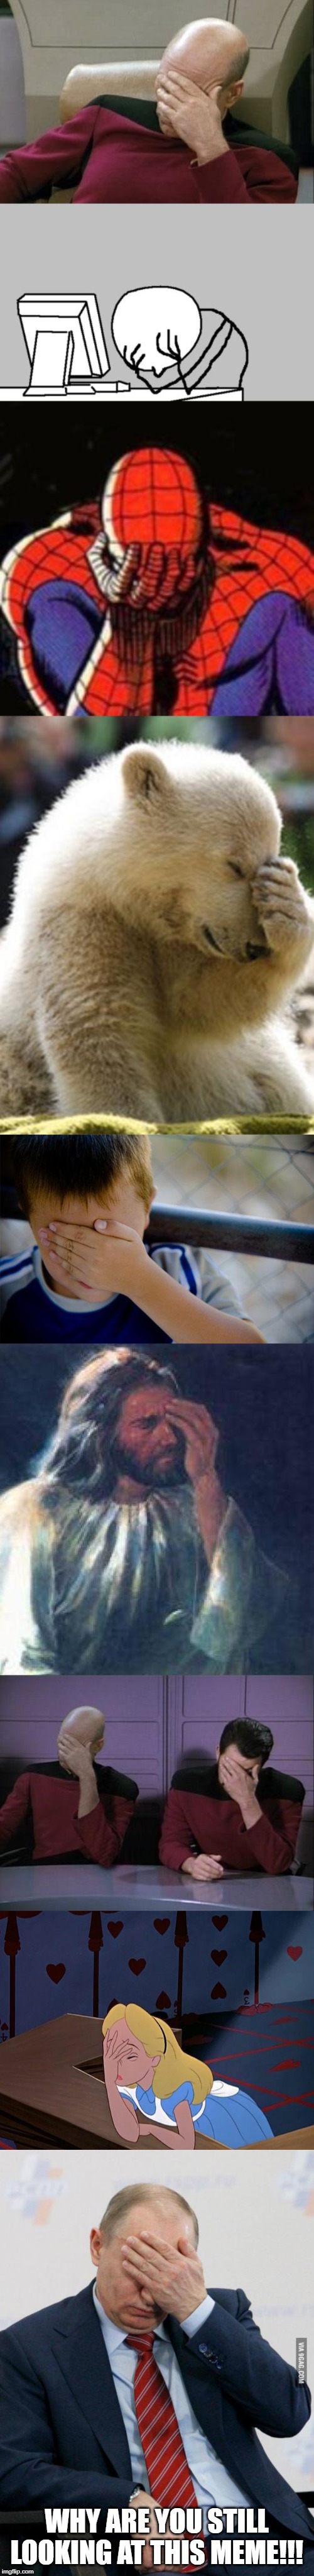 WHY ARE YOU STILL LOOKING AT THIS MEME!!! | image tagged in memes,sad spiderman,computer guy facepalm,captain picard facepalm,facepalm bear,confession kid | made w/ Imgflip meme maker